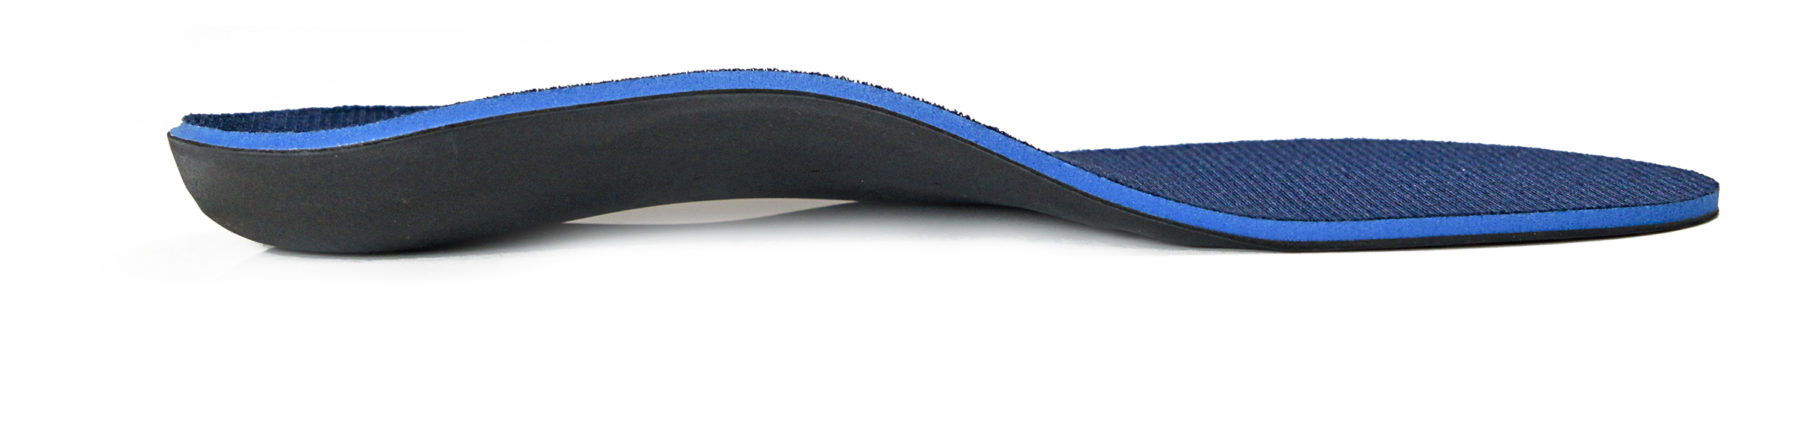 protech orthotic supports